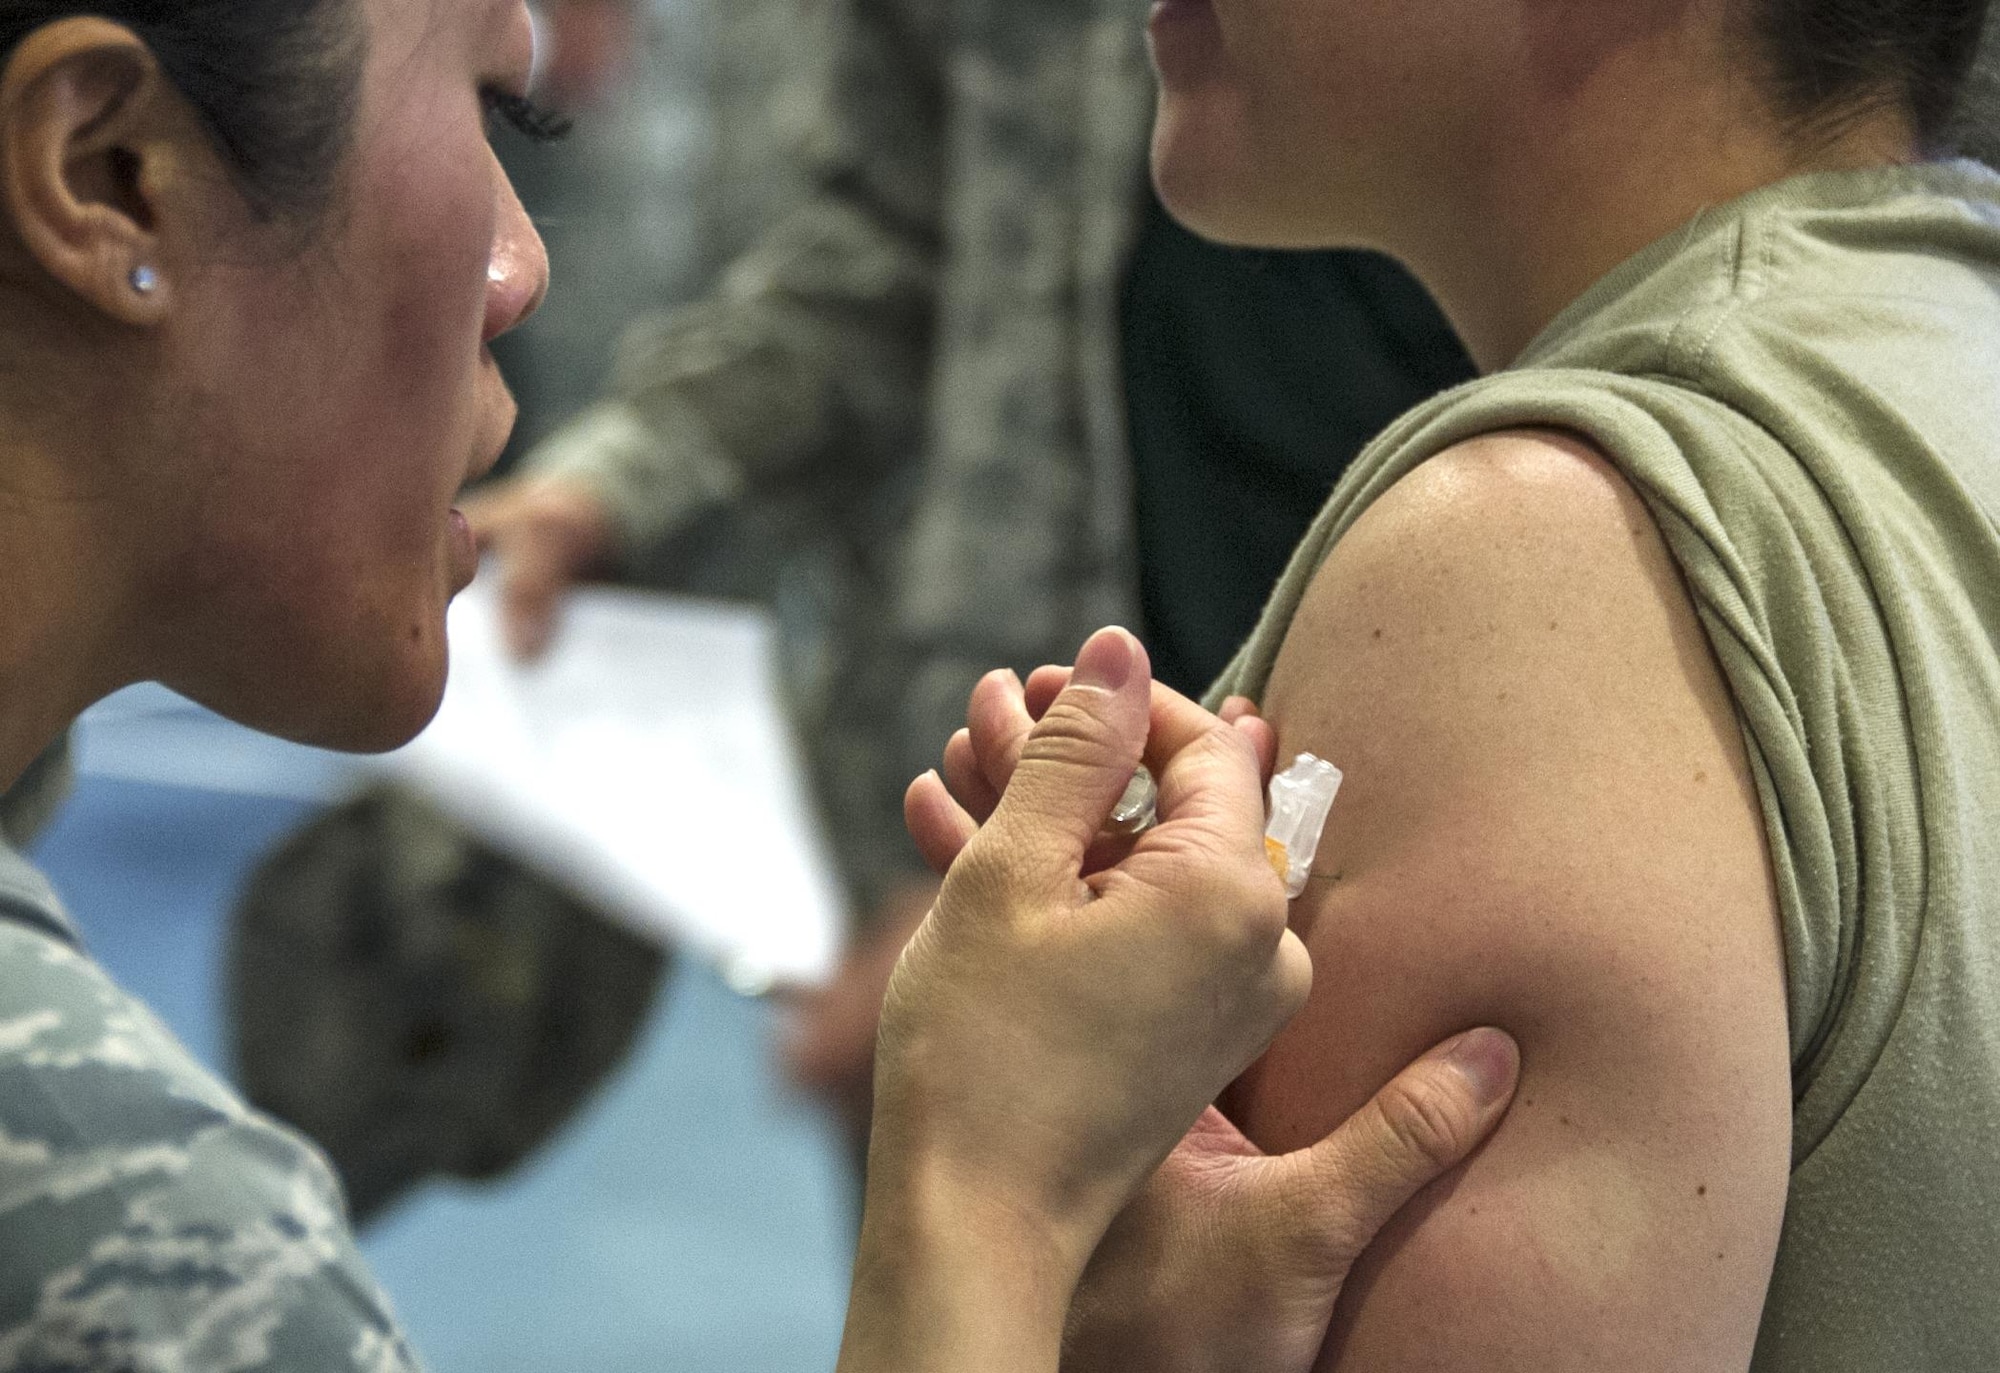 A member of the 310th Aerospace Medicine Flight administers the flu shot during the 310th Space Wing's commander's call on Sunday, Nov. 5, 2017.